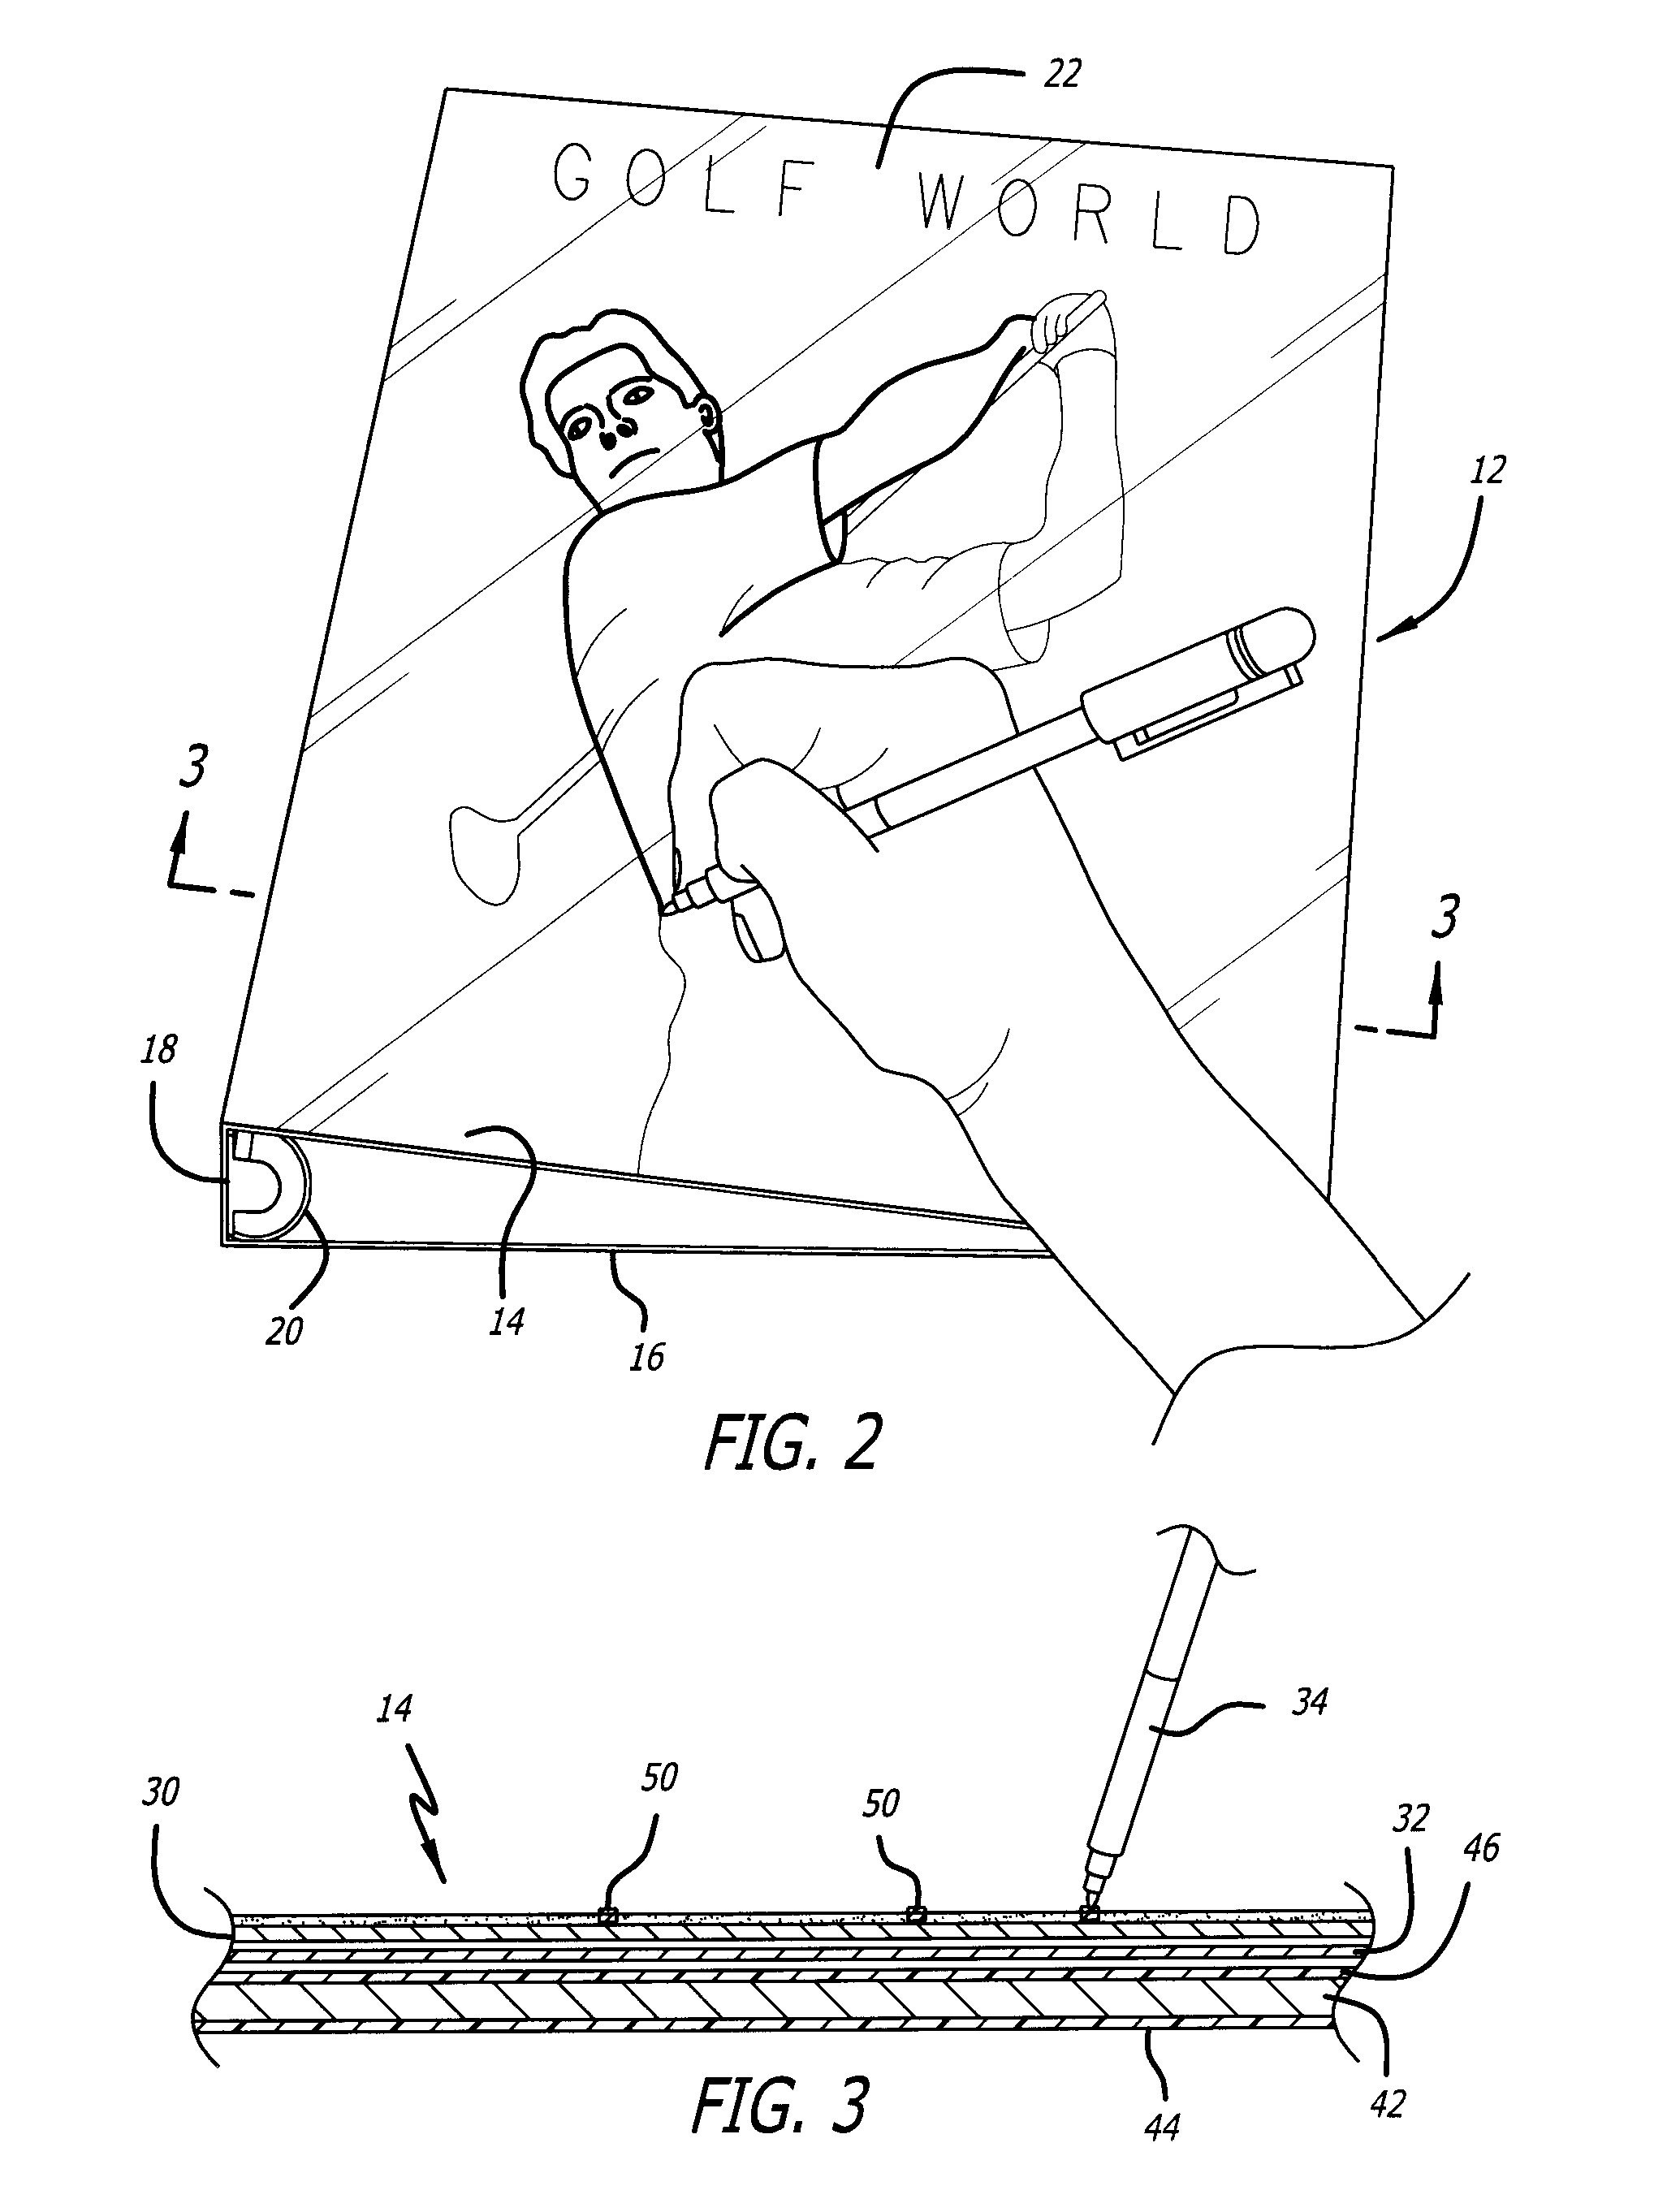 Drawable and/or traceable binder